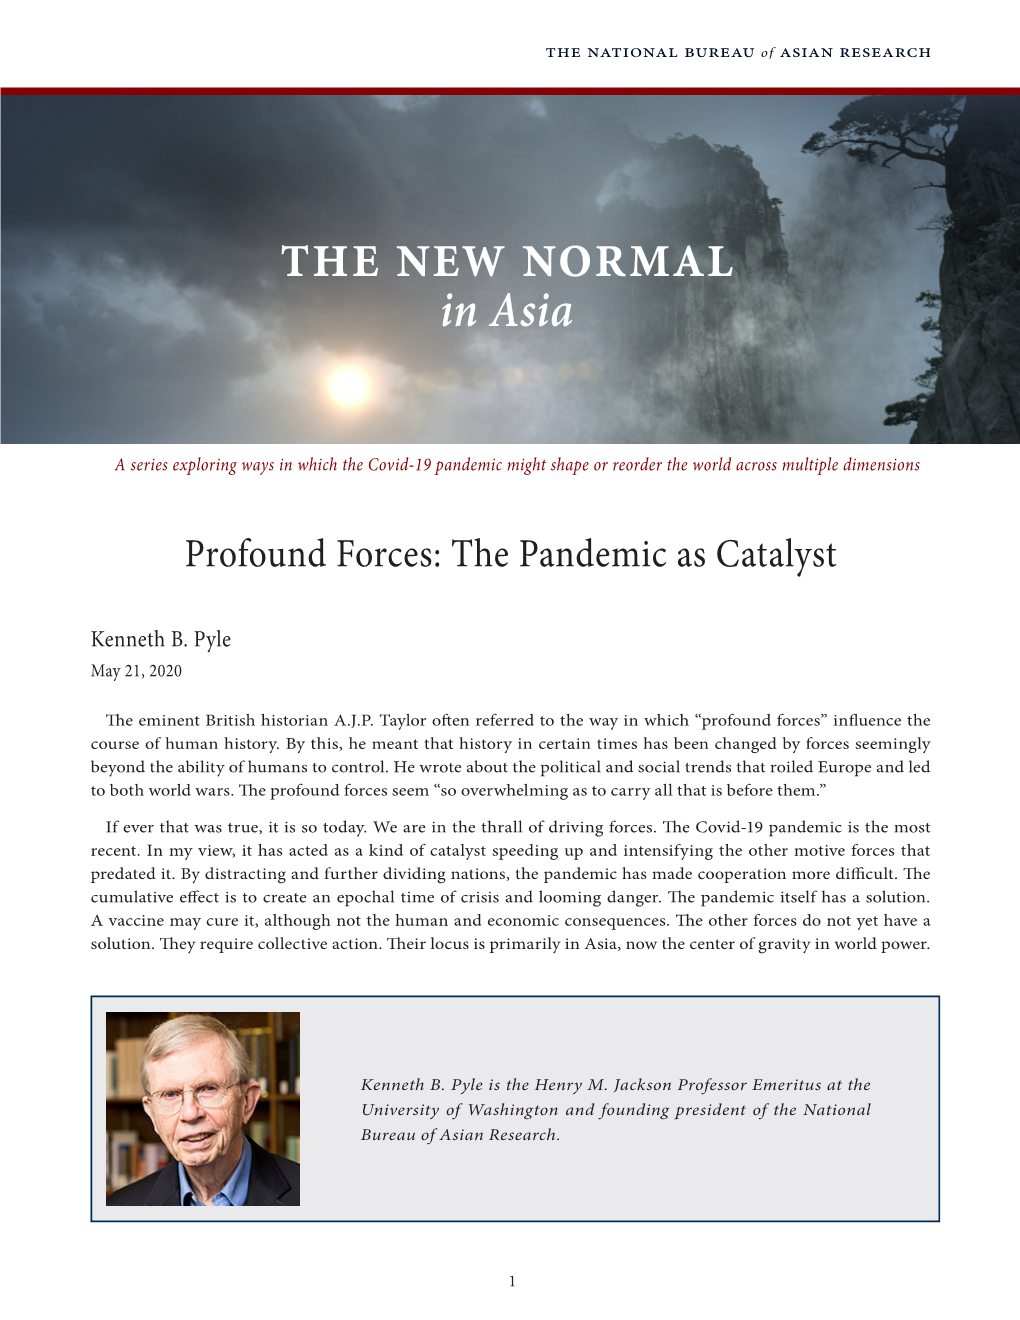 Profound Forces: the Pandemic As Catalyst